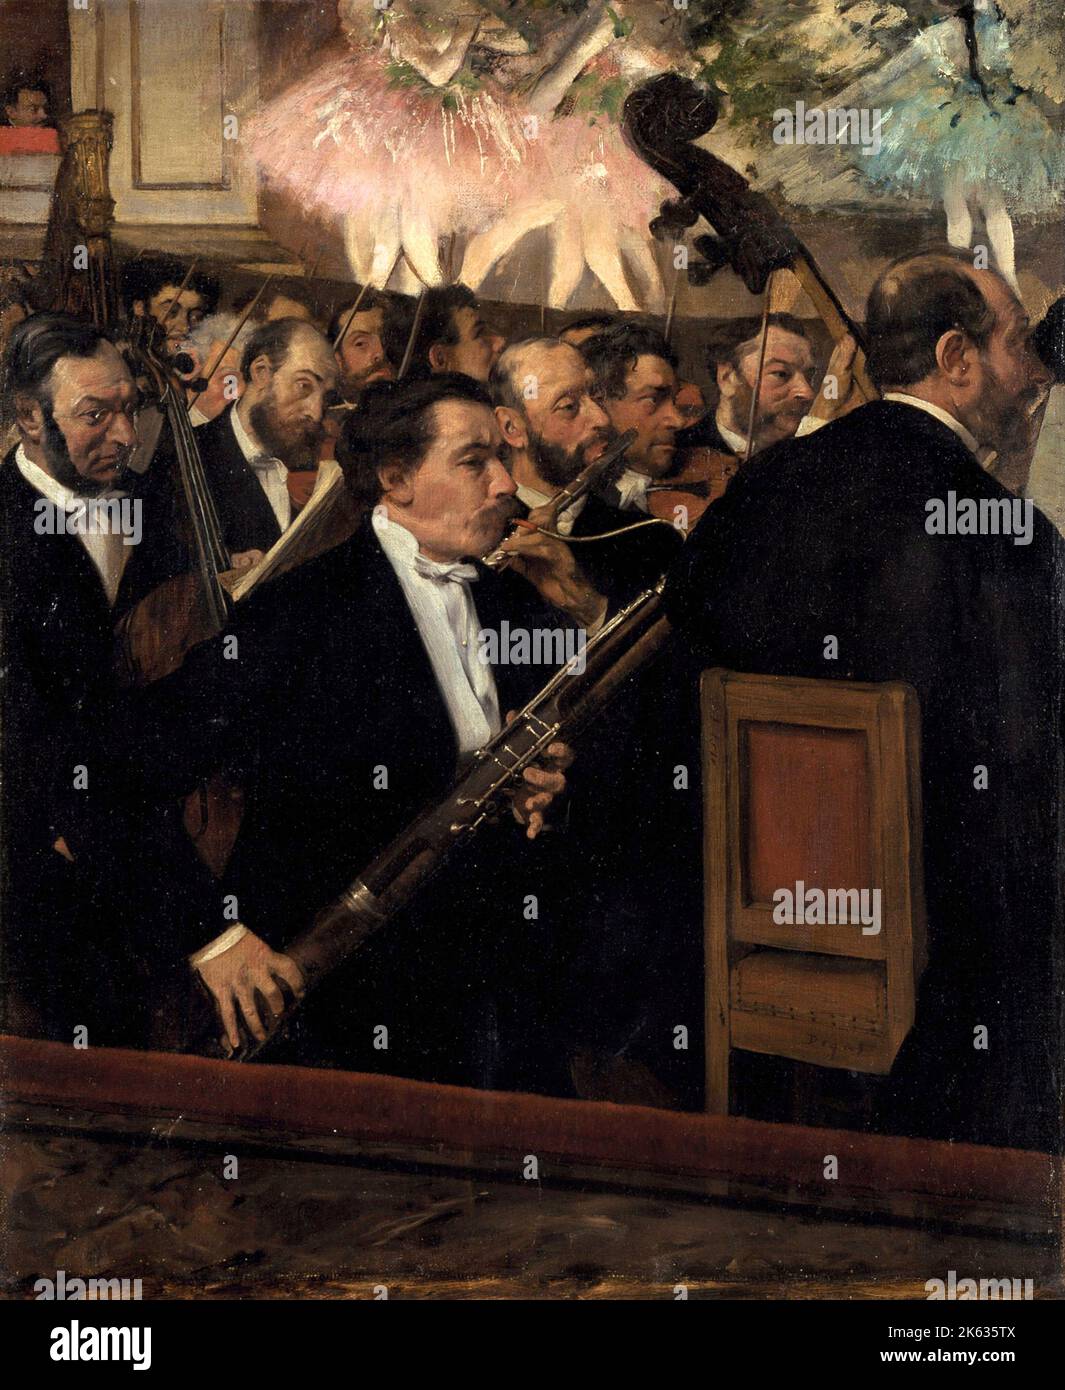 The Orchestra of the Opera, 1870, Painting by Edgar Degas Stock Photo